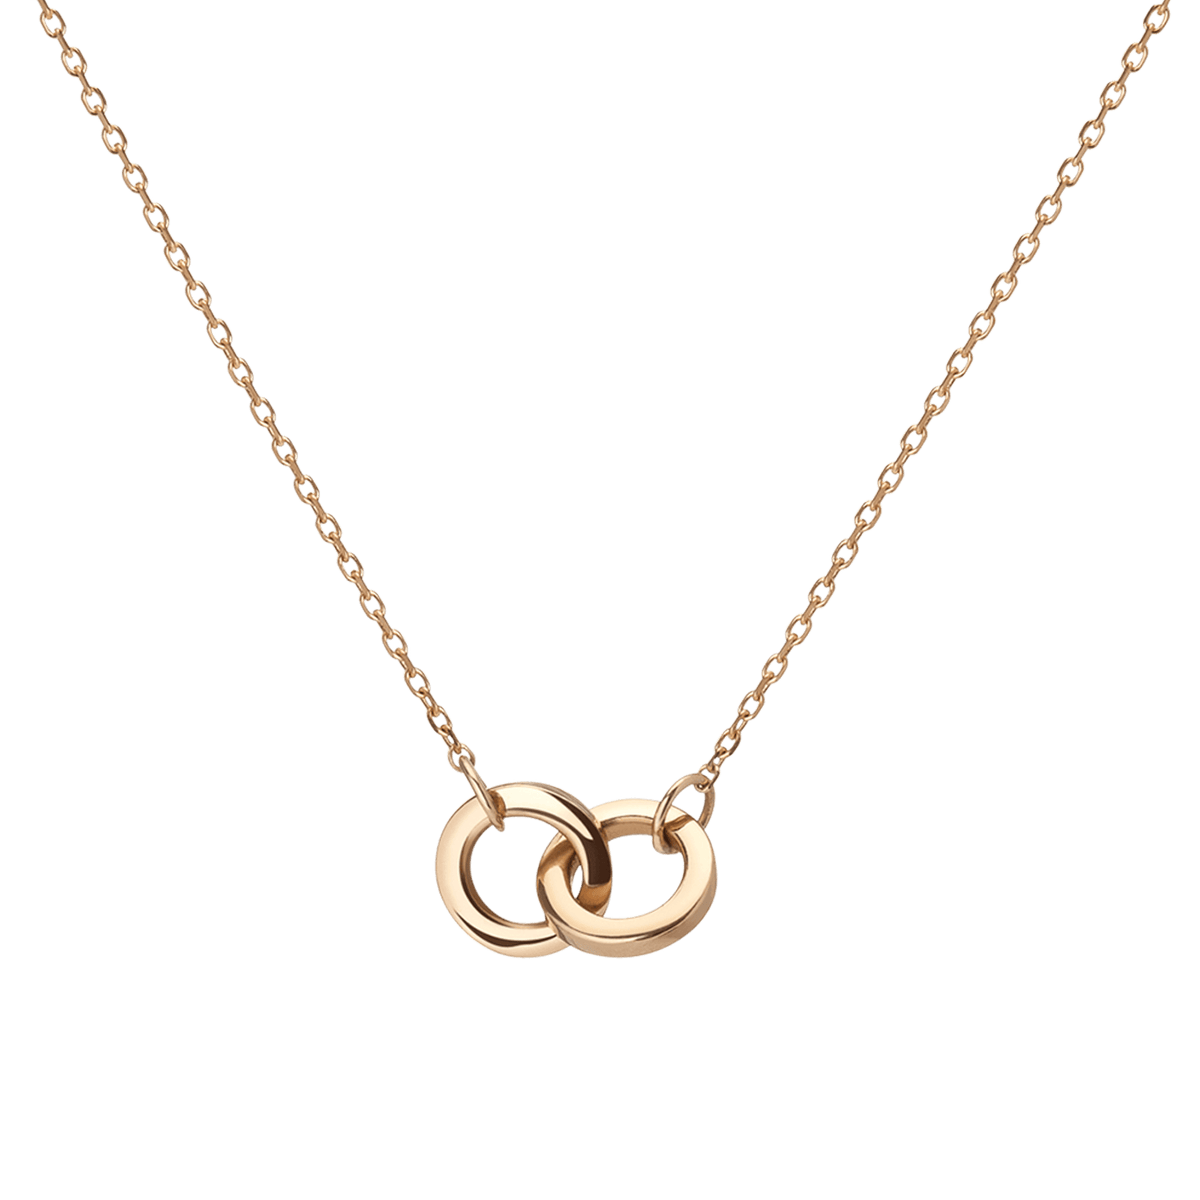 Aurate New York Classic Gold Letter Necklace, 14K Rose Gold